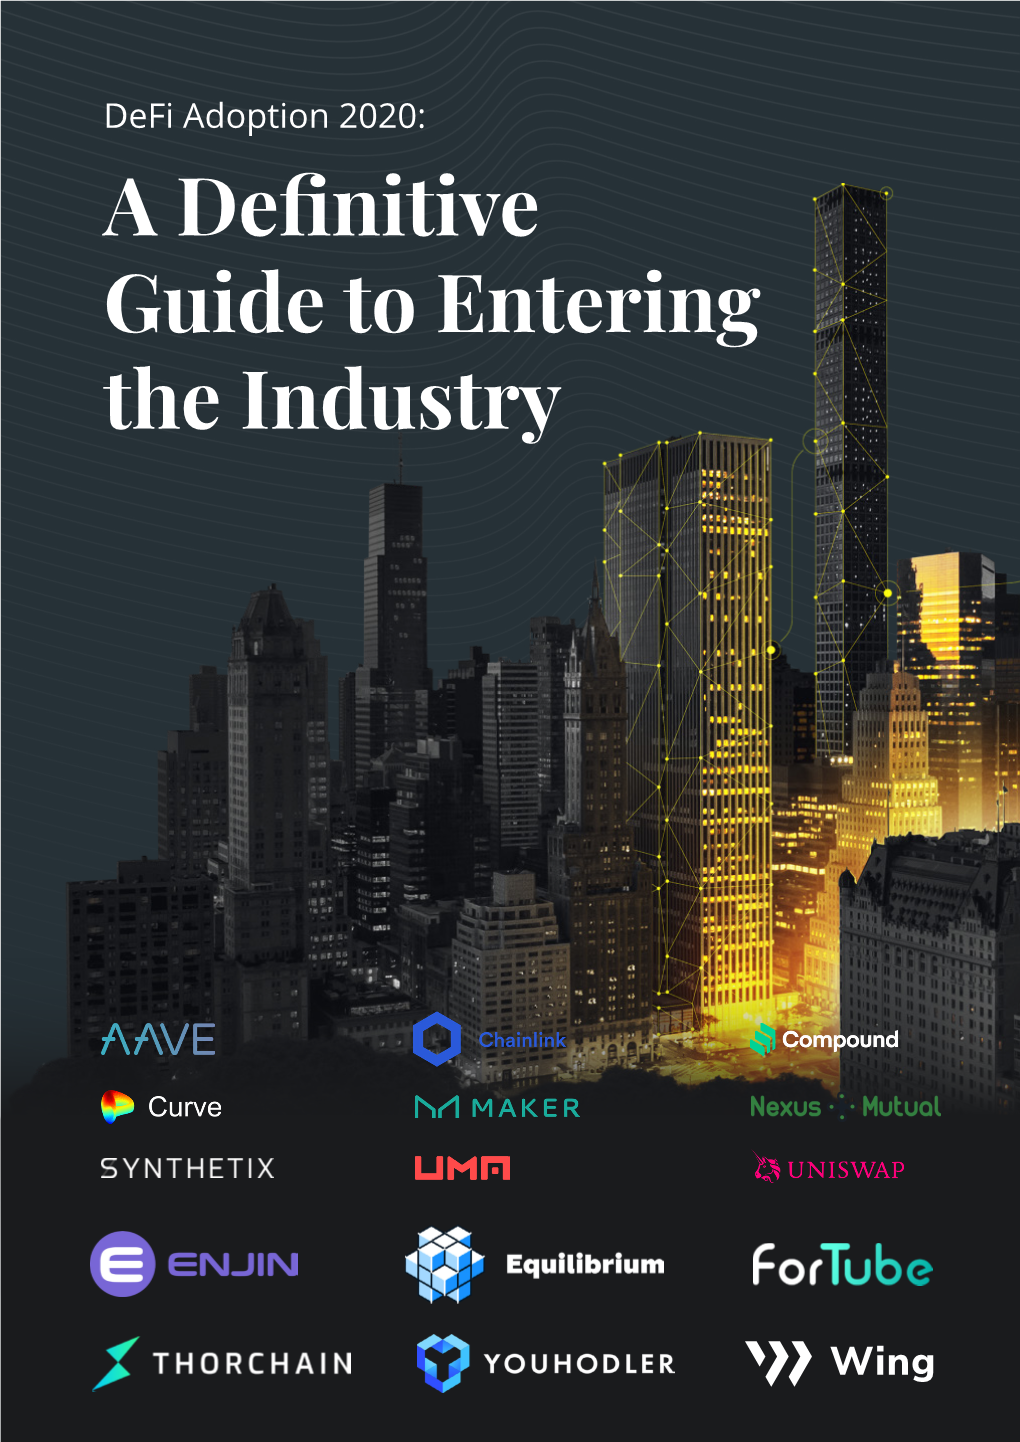 A Definitive Guide to Entering the Industry